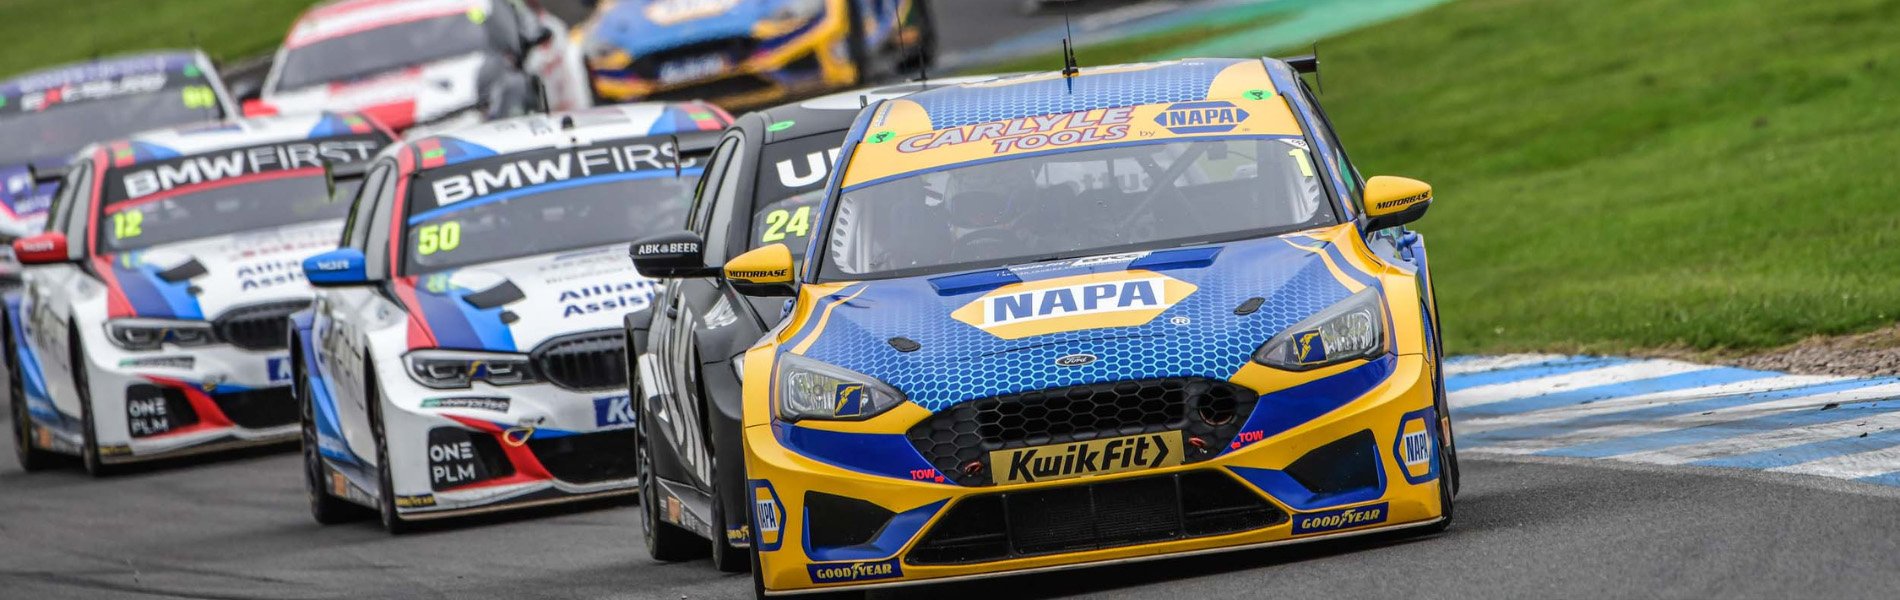 The thrilling Kwik Fit British Touring Car Championship event features 3 Touring Car races and support racing action from Porsche Carrera Cup GB, Quaife Mini Challenge, MUK British Formula 4 & National Legends Championships.